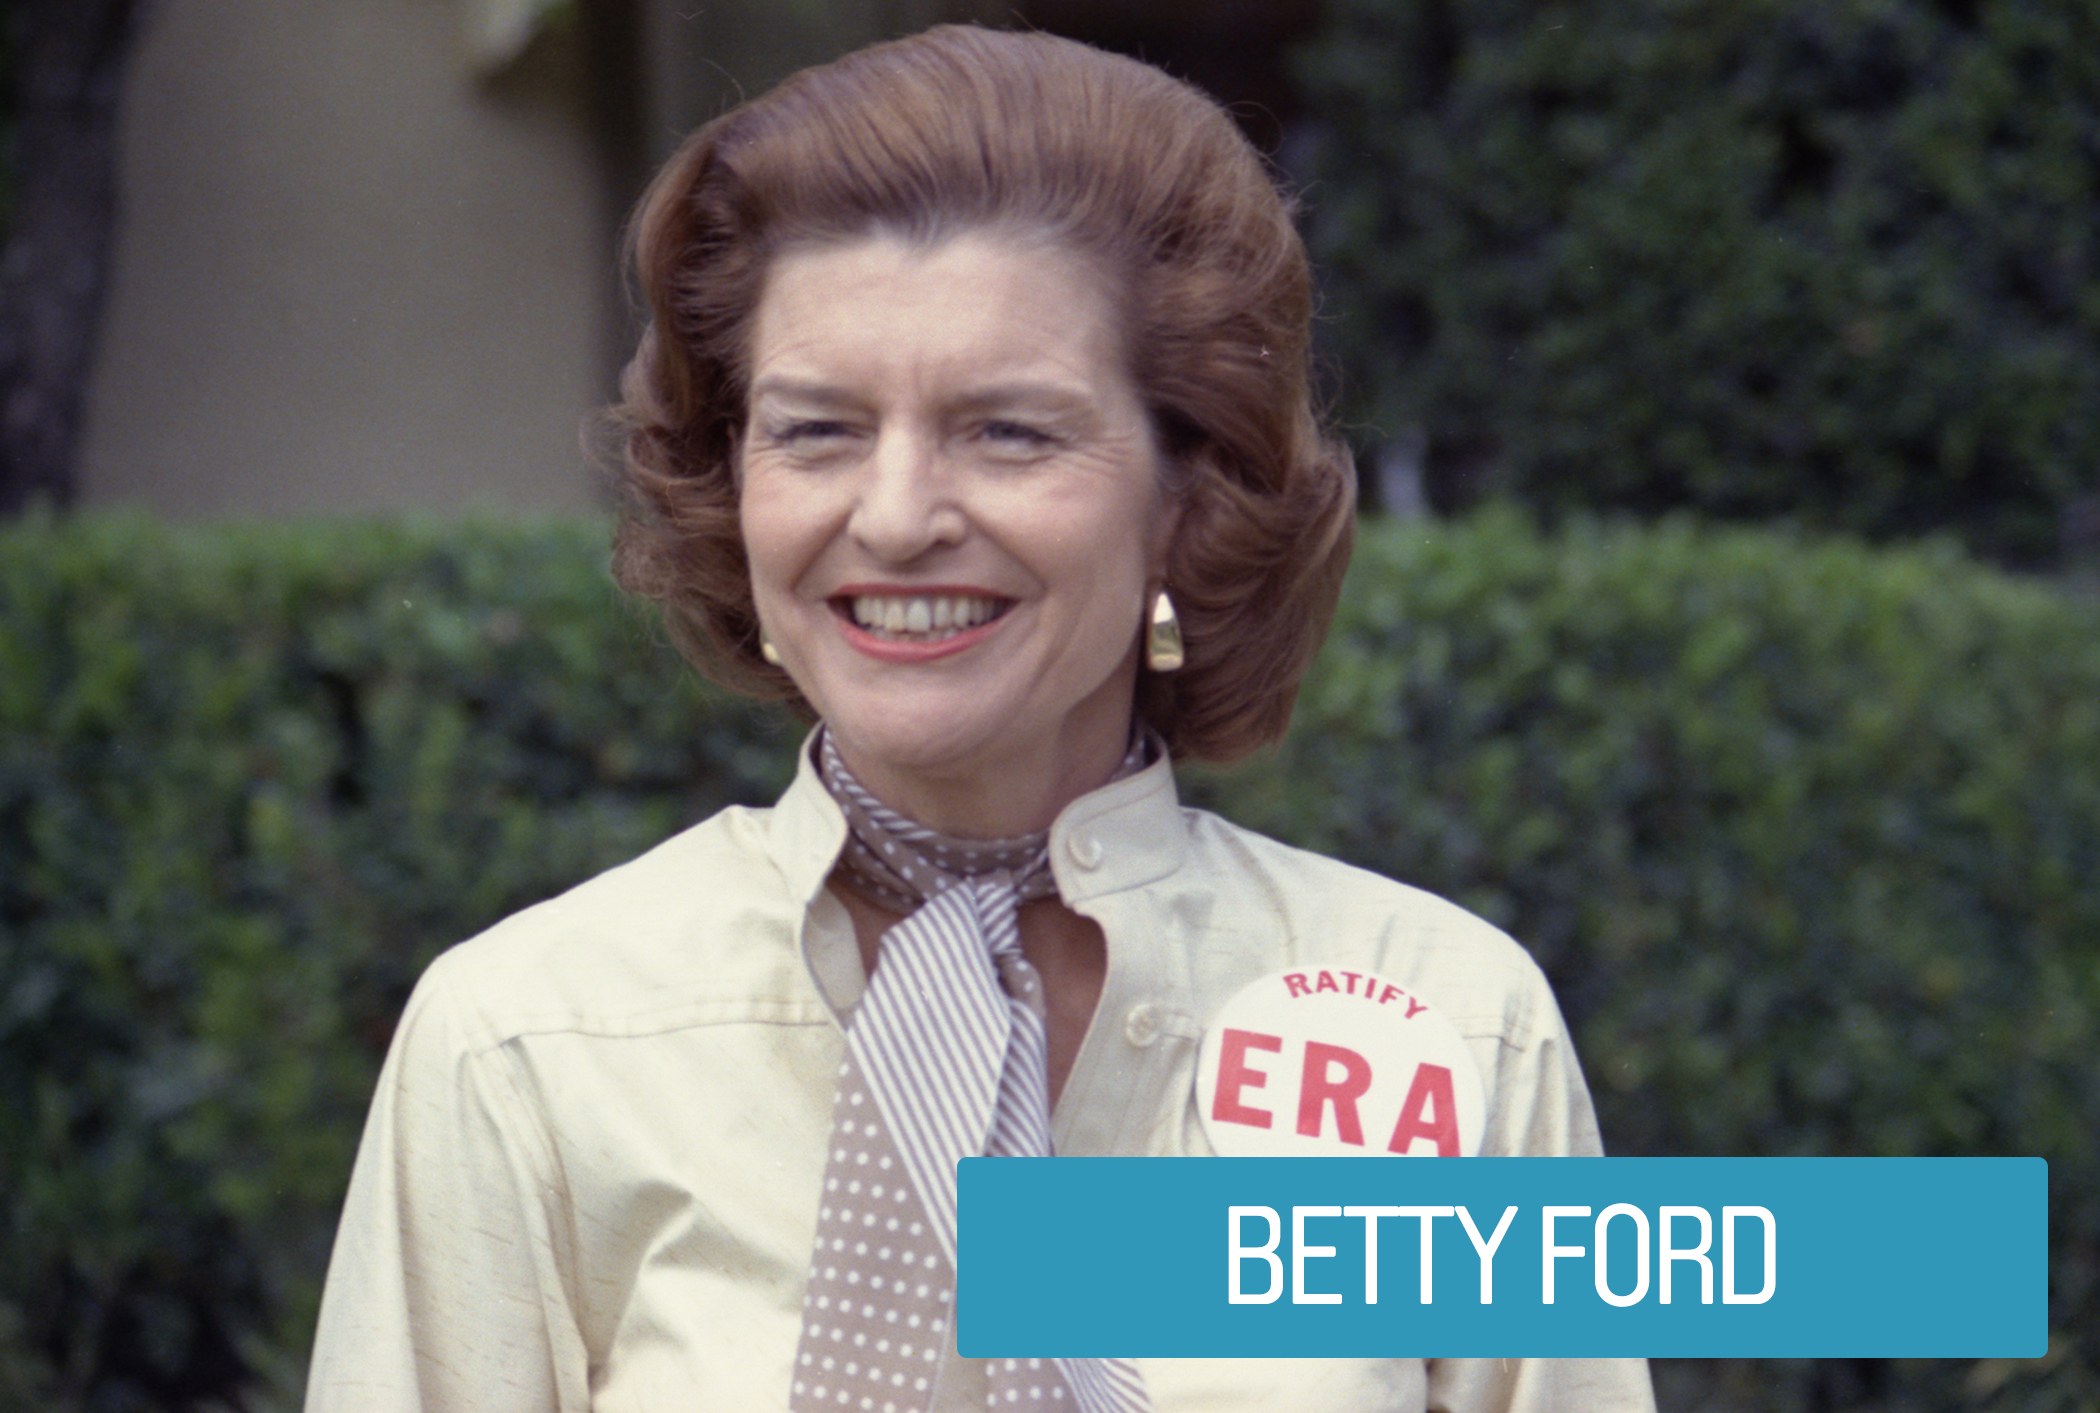 Betty Ford spent her White House years advocating for increased opportunities for women in society. Her work calling and lobbying members of state legislatures helped to ensure the eventual ratification the Equal Rights Amendment (ERA).  The ERA guaranteed equal rights to women under federal, state and local laws.